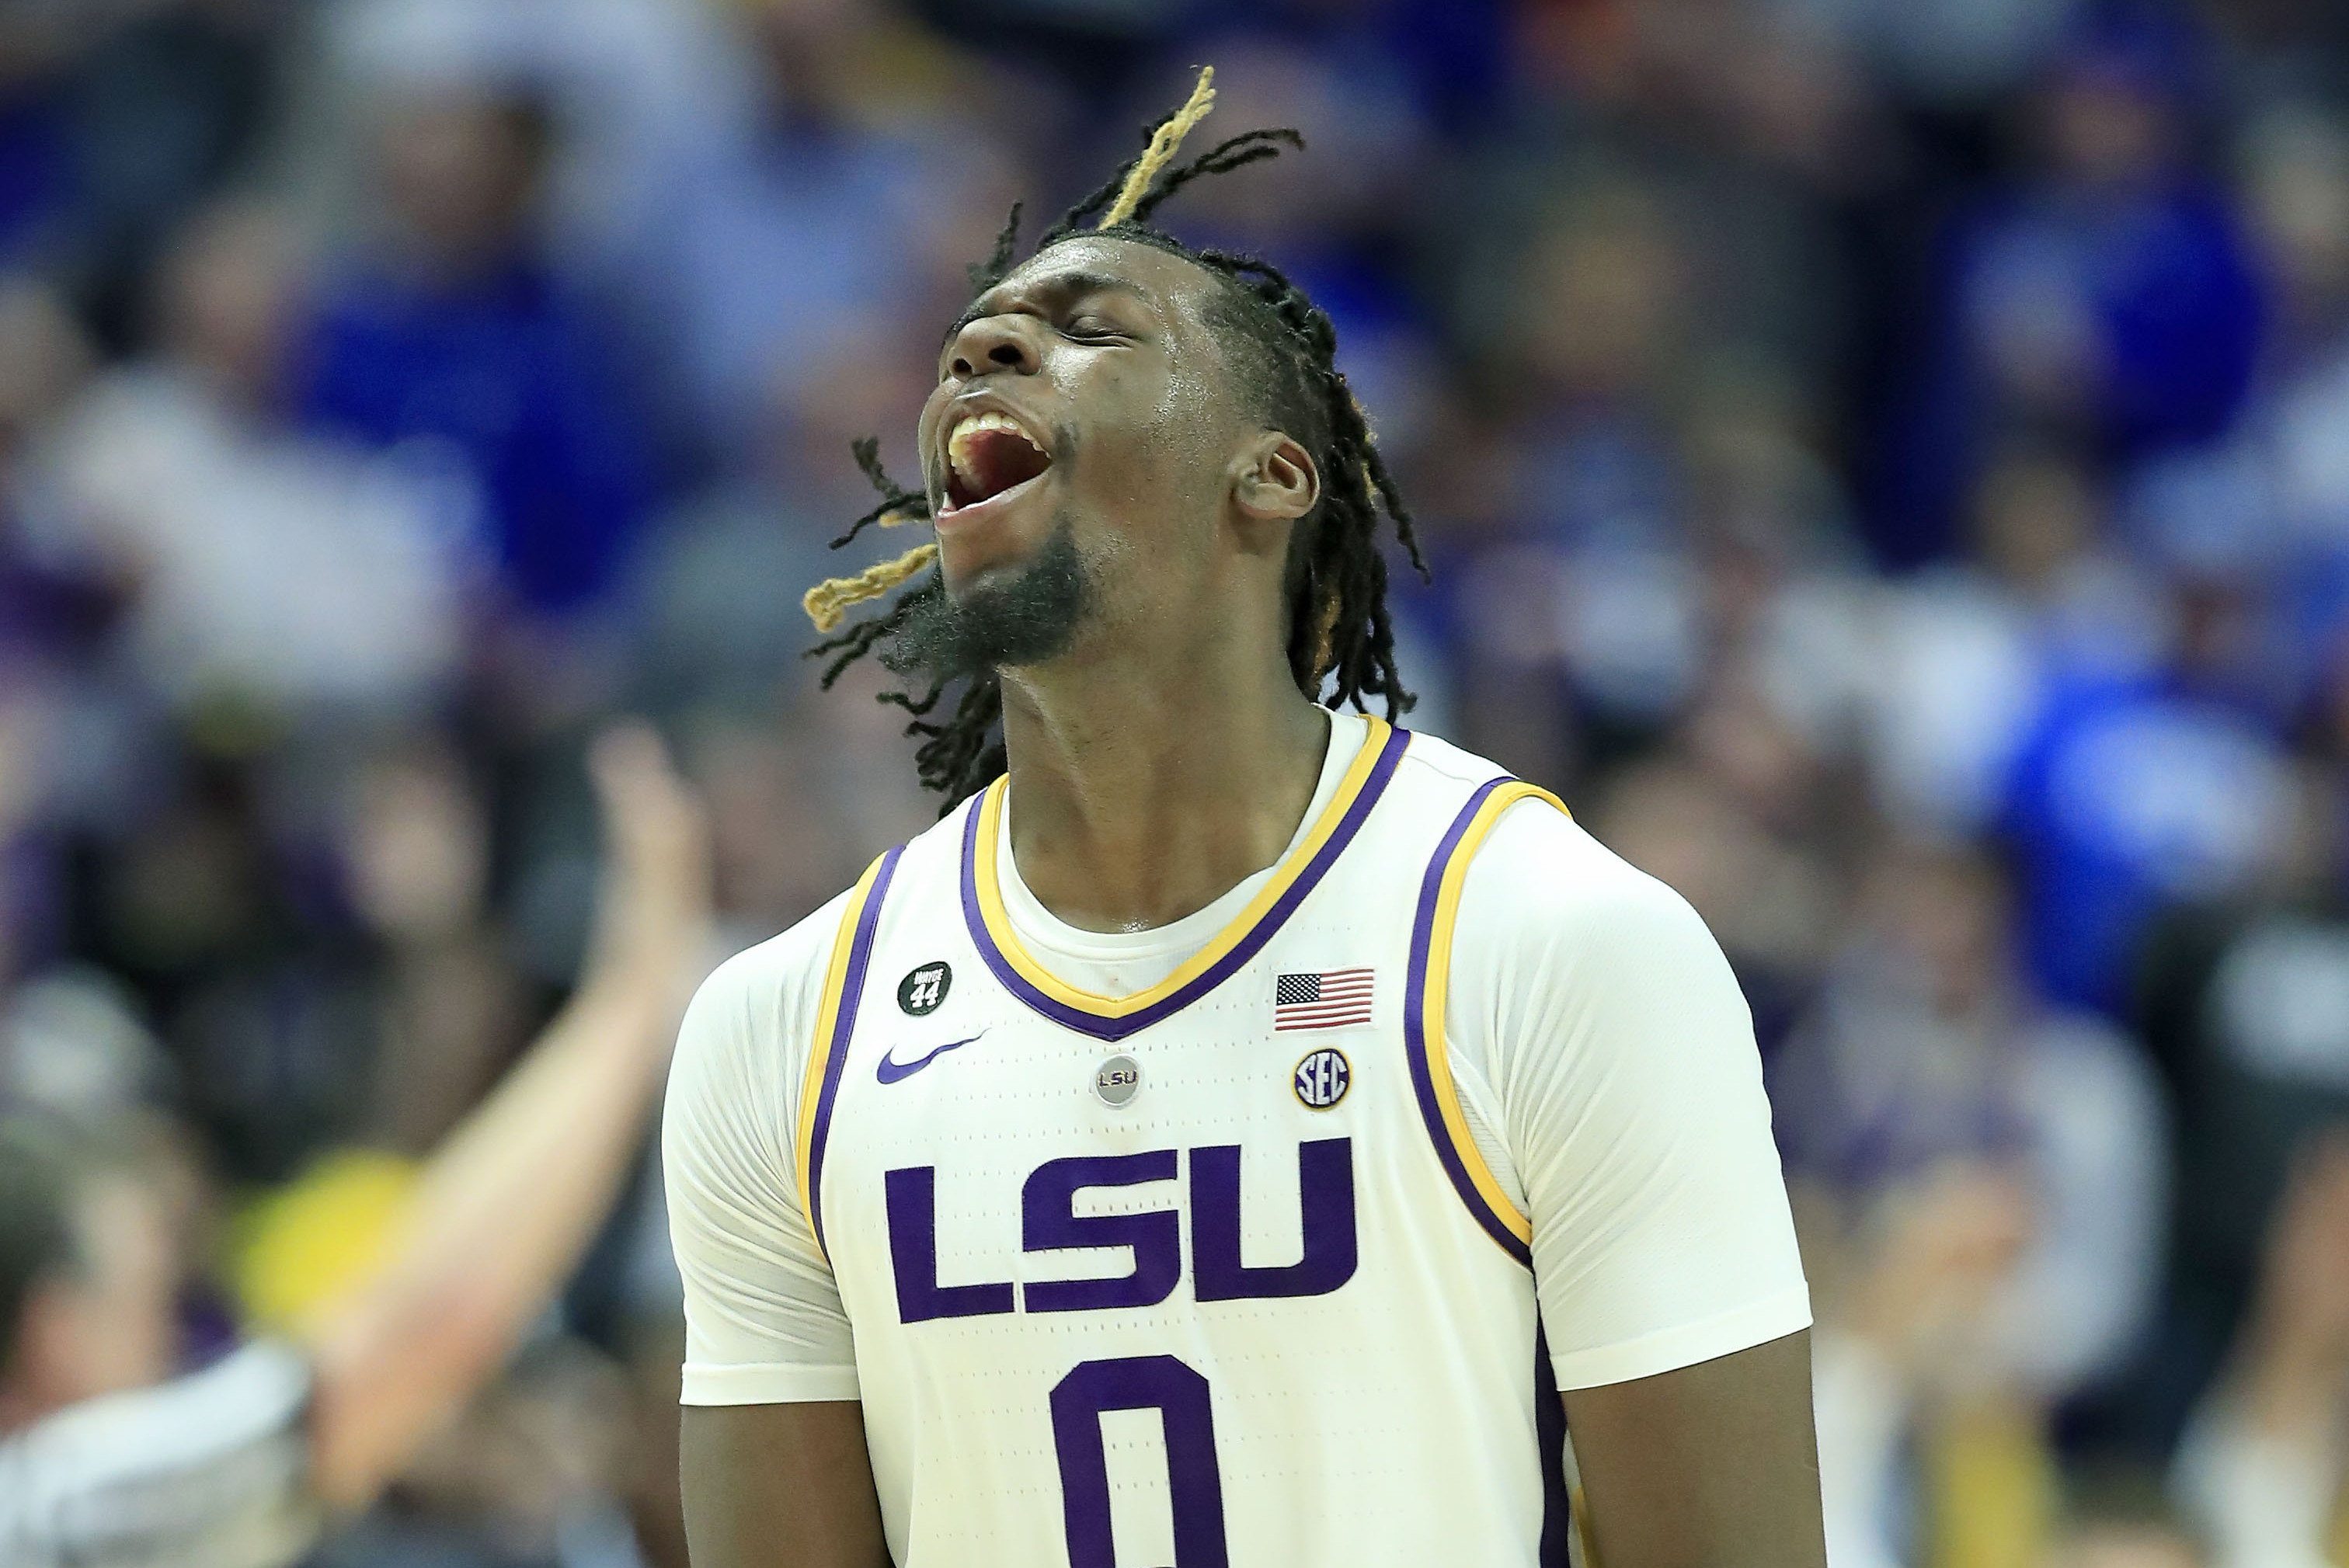 Naz Time: LSU hosts Auburn with freshman Reid coming into this own